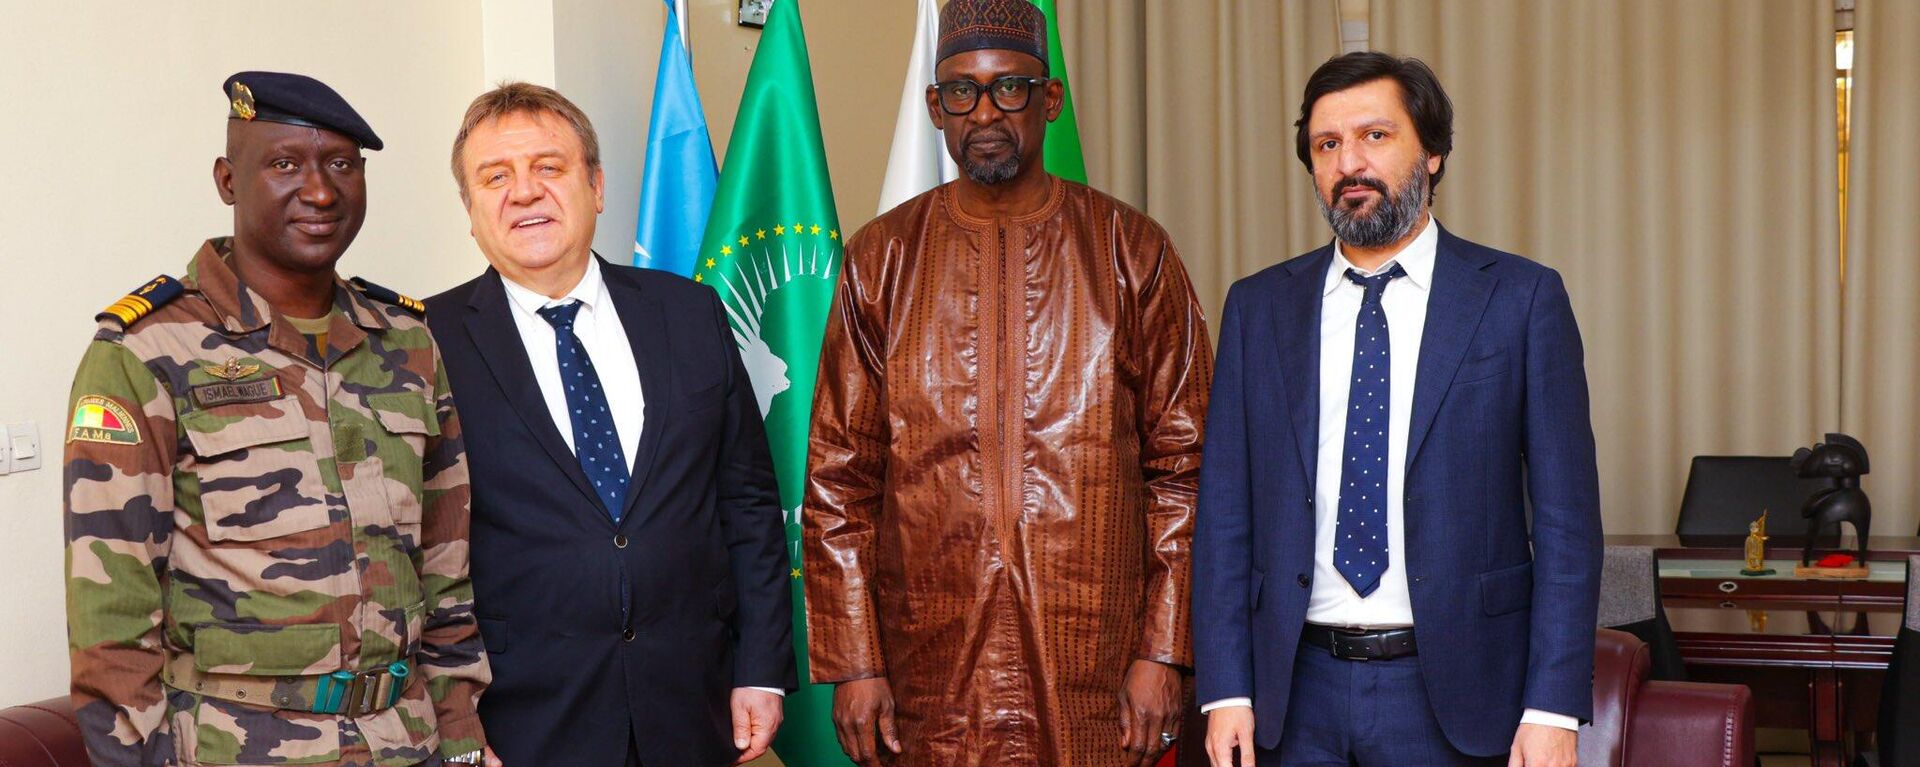 Meeting of the Mali's Minister of Foreign Affairs Abdoulaye Diop and Minister of Reconciliation, Peace and National Cohesion Ismael Wague with Russian Ambassador Igor Gromyko on January, 26 2024. - Sputnik Africa, 1920, 28.01.2024